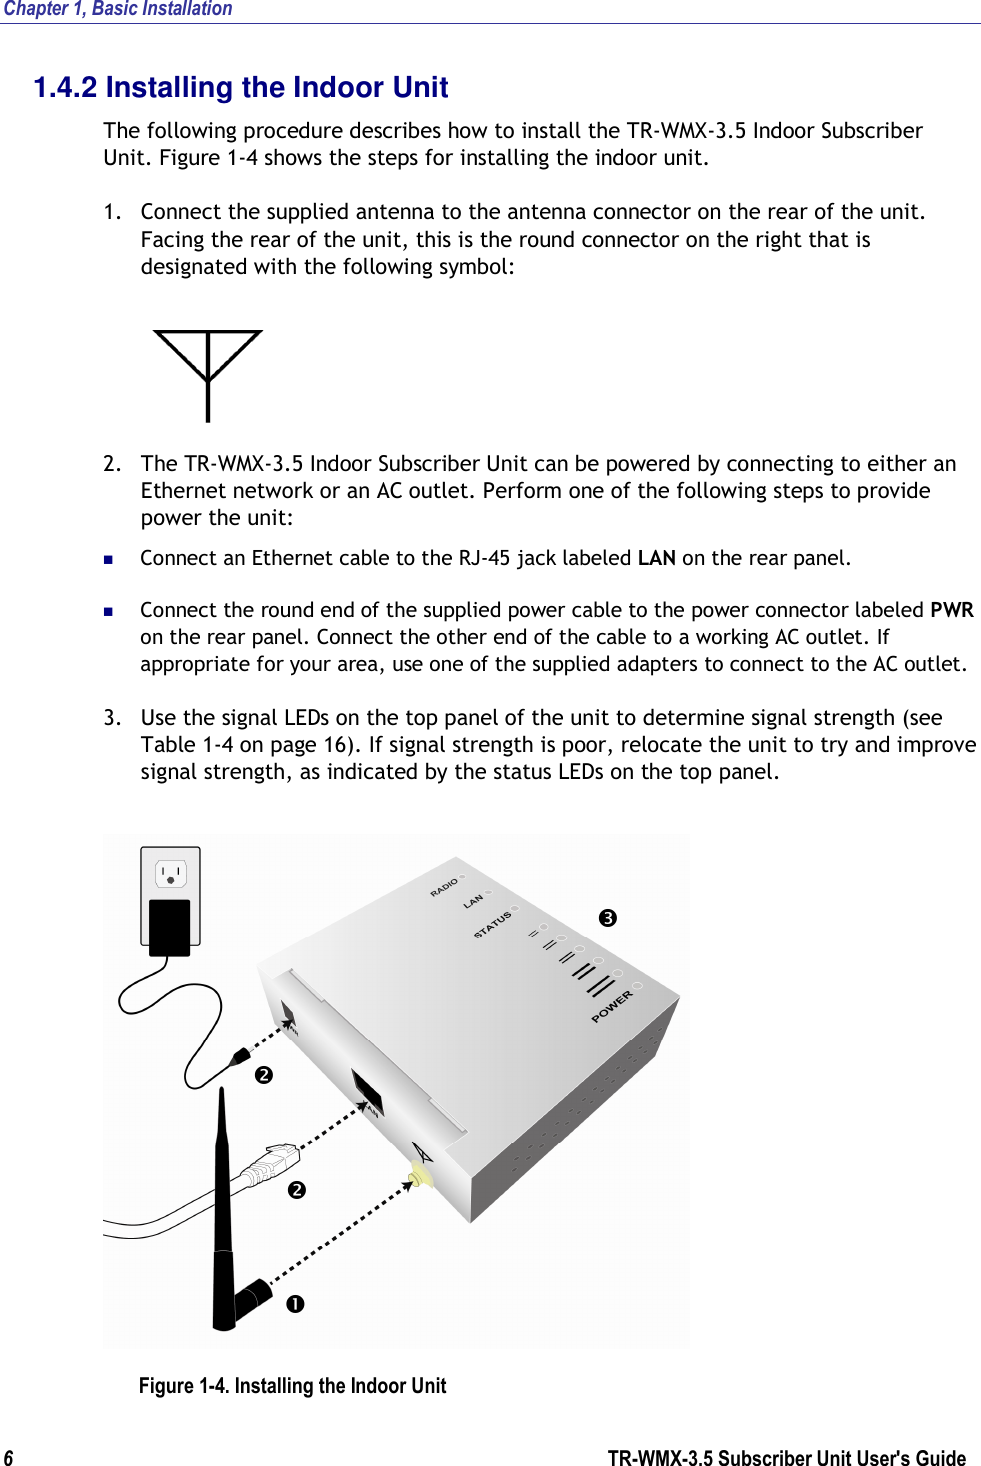 Chapter 1, Basic Installation  6                      TR-WMX-3.5 Subscriber Unit User&apos;s Guide  1.4.2 Installing the Indoor Unit The following procedure describes how to install the TR-WMX-3.5 Indoor Subscriber Unit. Figure 1-4 shows the steps for installing the indoor unit. 1. Connect the supplied antenna to the antenna connector on the rear of the unit. Facing the rear of the unit, this is the round connector on the right that is designated with the following symbol:    2. The TR-WMX-3.5 Indoor Subscriber Unit can be powered by connecting to either an Ethernet network or an AC outlet. Perform one of the following steps to provide power the unit:  Connect an Ethernet cable to the RJ-45 jack labeled LAN on the rear panel.  Connect the round end of the supplied power cable to the power connector labeled PWR on the rear panel. Connect the other end of the cable to a working AC outlet. If appropriate for your area, use one of the supplied adapters to connect to the AC outlet. 3. Use the signal LEDs on the top panel of the unit to determine signal strength (see Table 1-4 on page 16). If signal strength is poor, relocate the unit to try and improve signal strength, as indicated by the status LEDs on the top panel.  Figure 1-4. Installing the Indoor Unit     